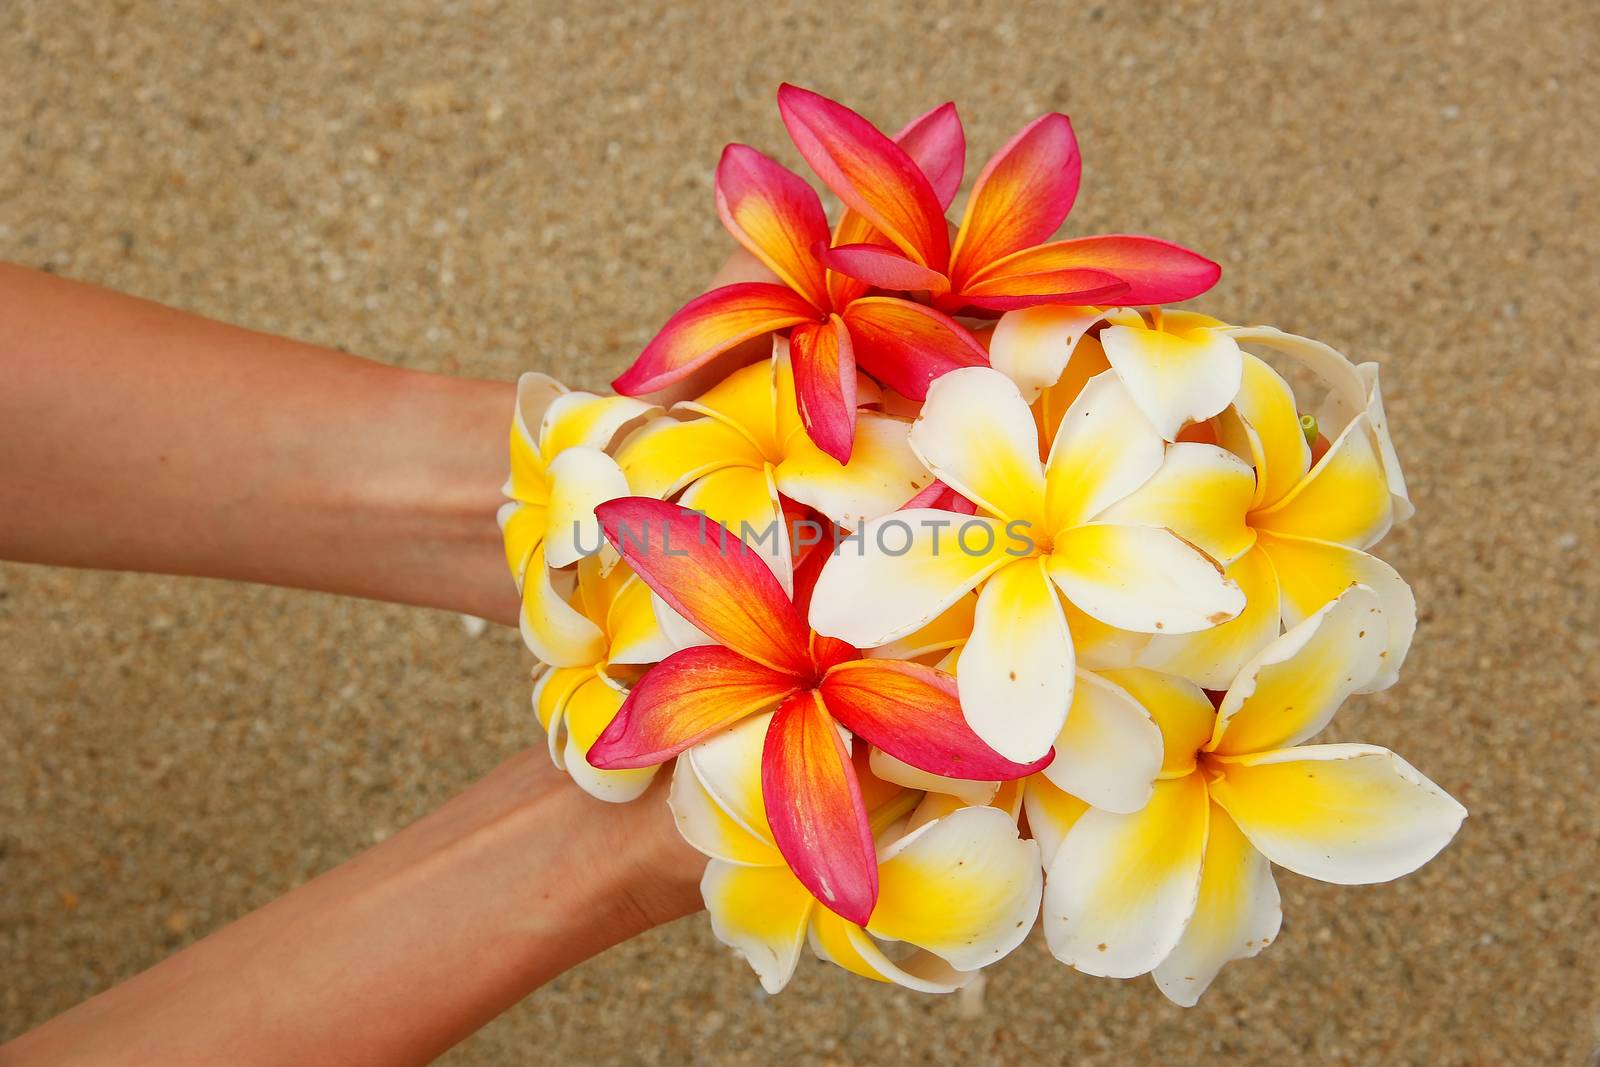 Hands holding white and pink plumeria flowers by donya_nedomam